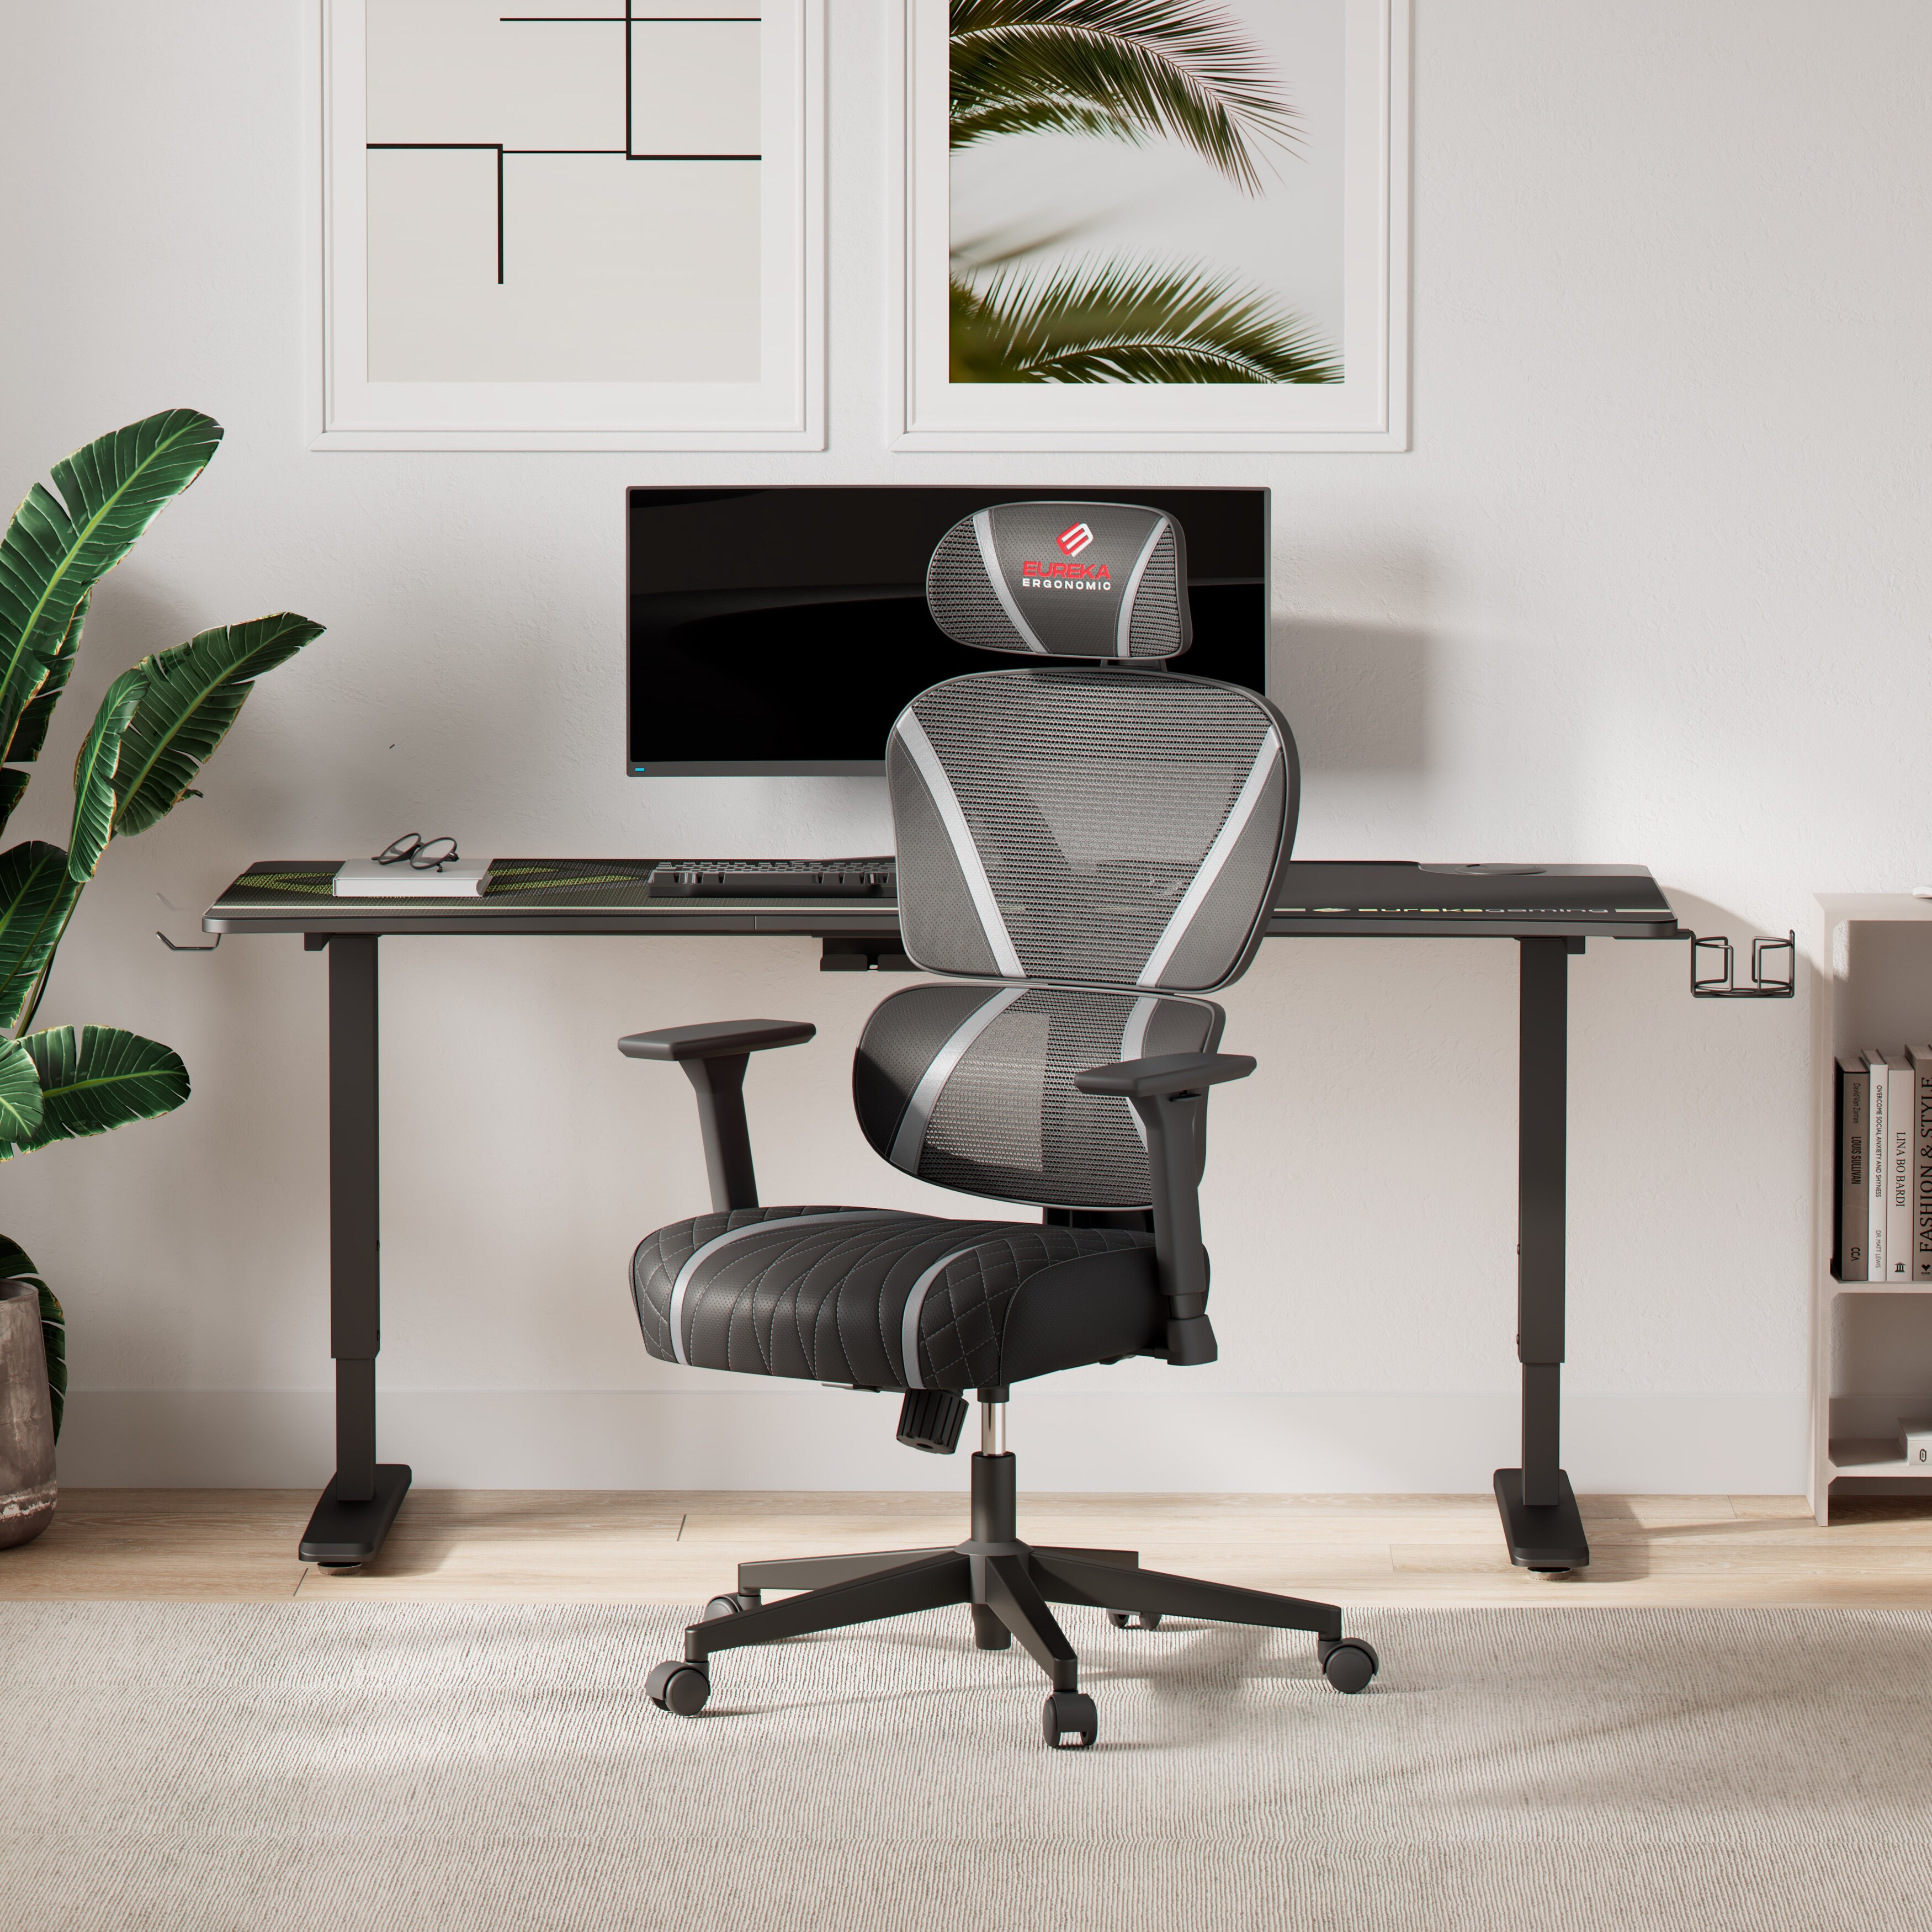 https://ak1.ostkcdn.com/images/products/is/images/direct/9e94c9f49be7fc2a3bfc735ef412f2fc0d161954/Eureka-Ergonomic-Home-Office-Chair-High-Back-Swivel-Executive-Computer-Desk-Chair.jpg